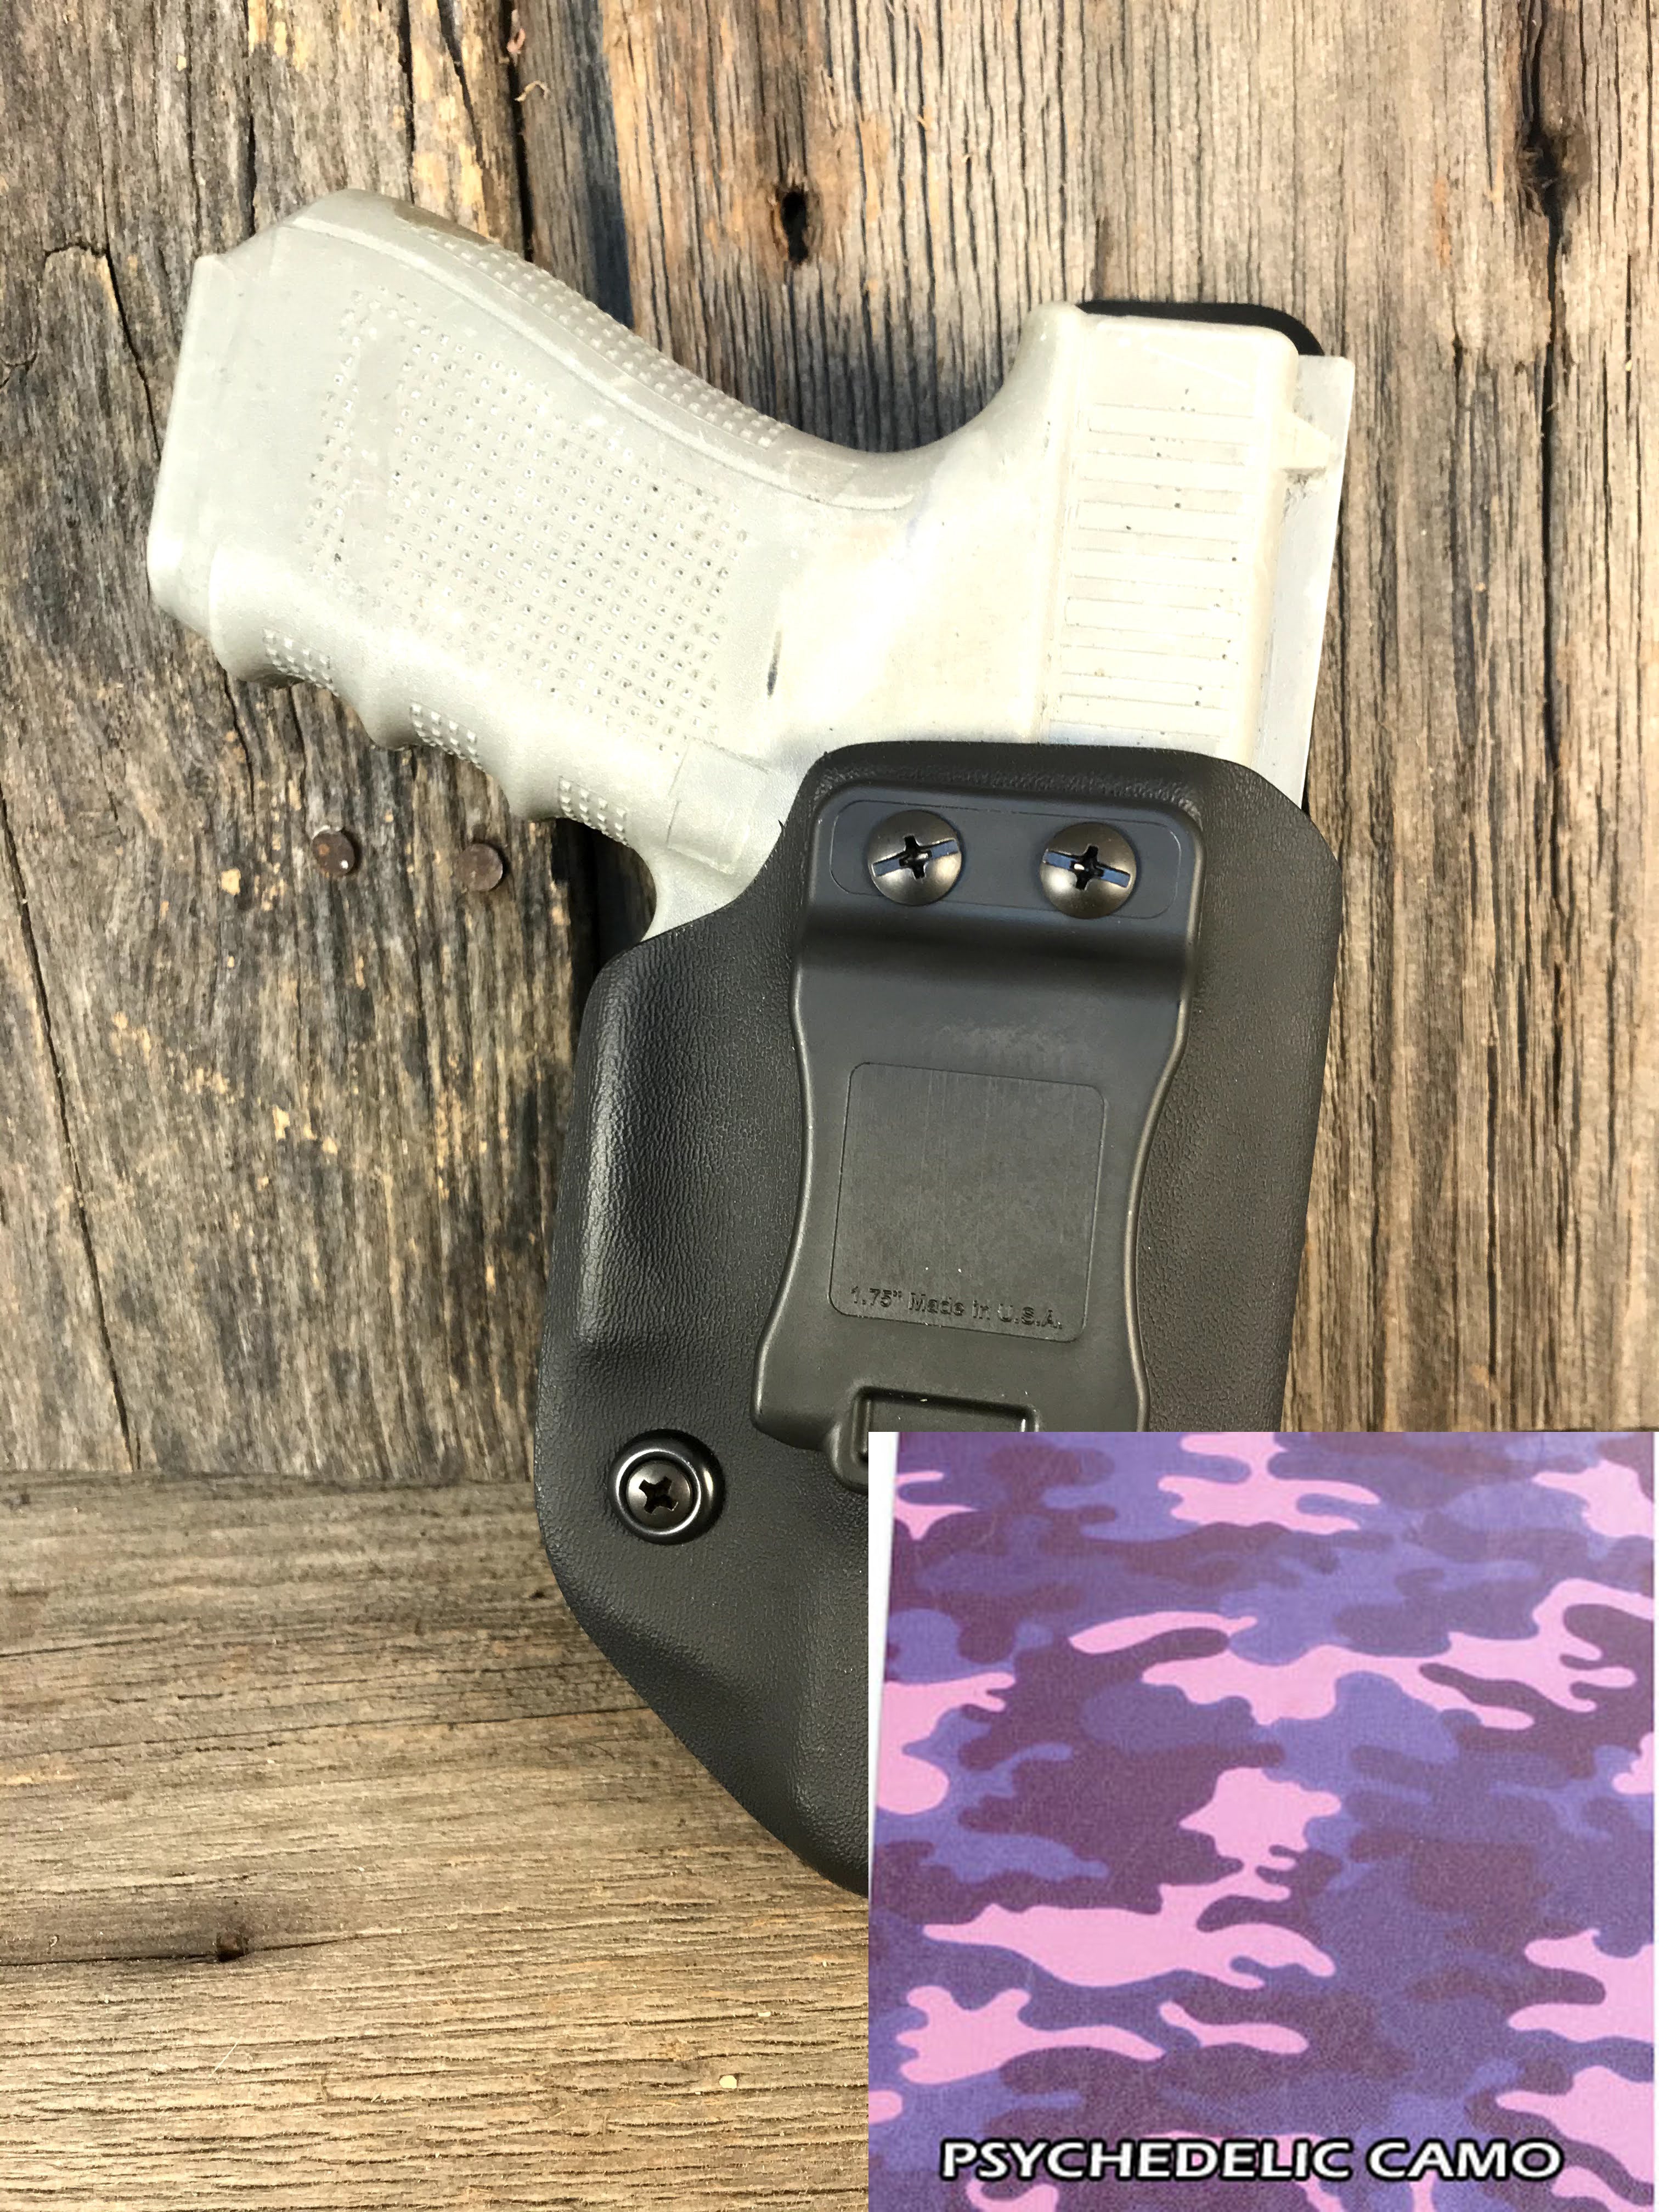 Kydex IWB- Tacticlip- Patterned Kydex